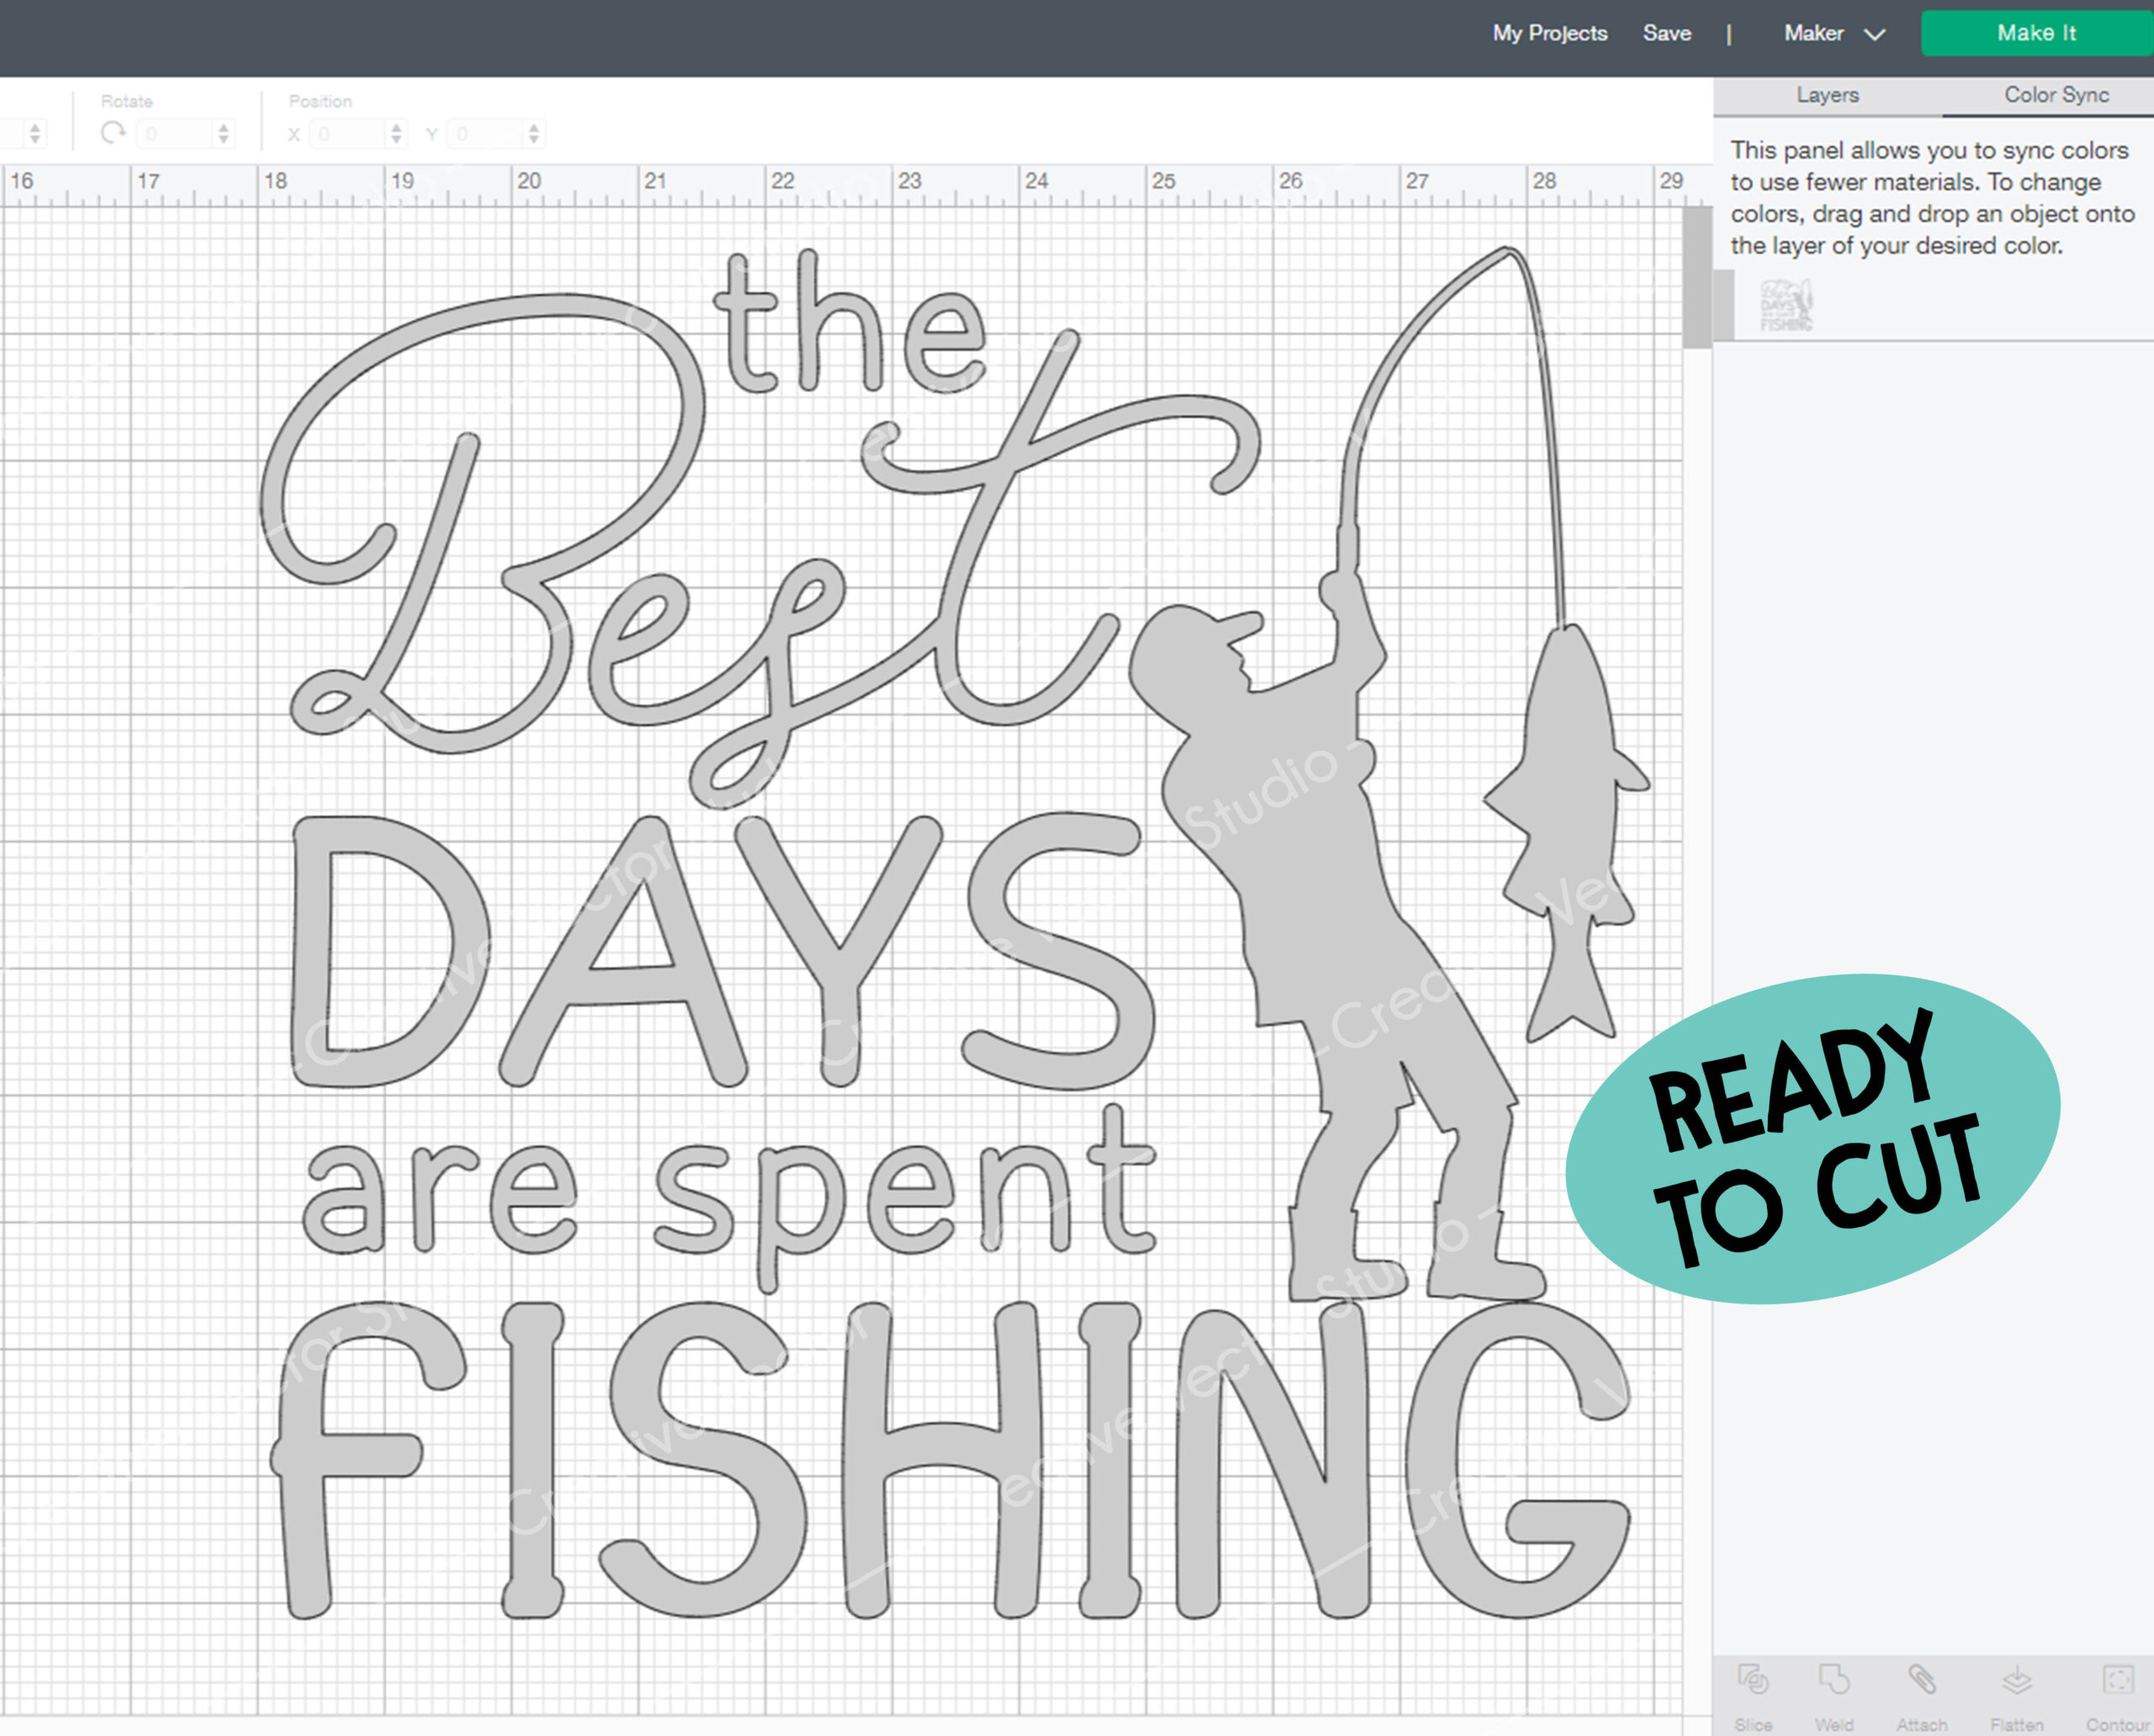 https://creative-vector-studio.com/wp-content/uploads/2021/03/the-best-days-are-spent-fishing-svg-cut-file-scaled.jpg